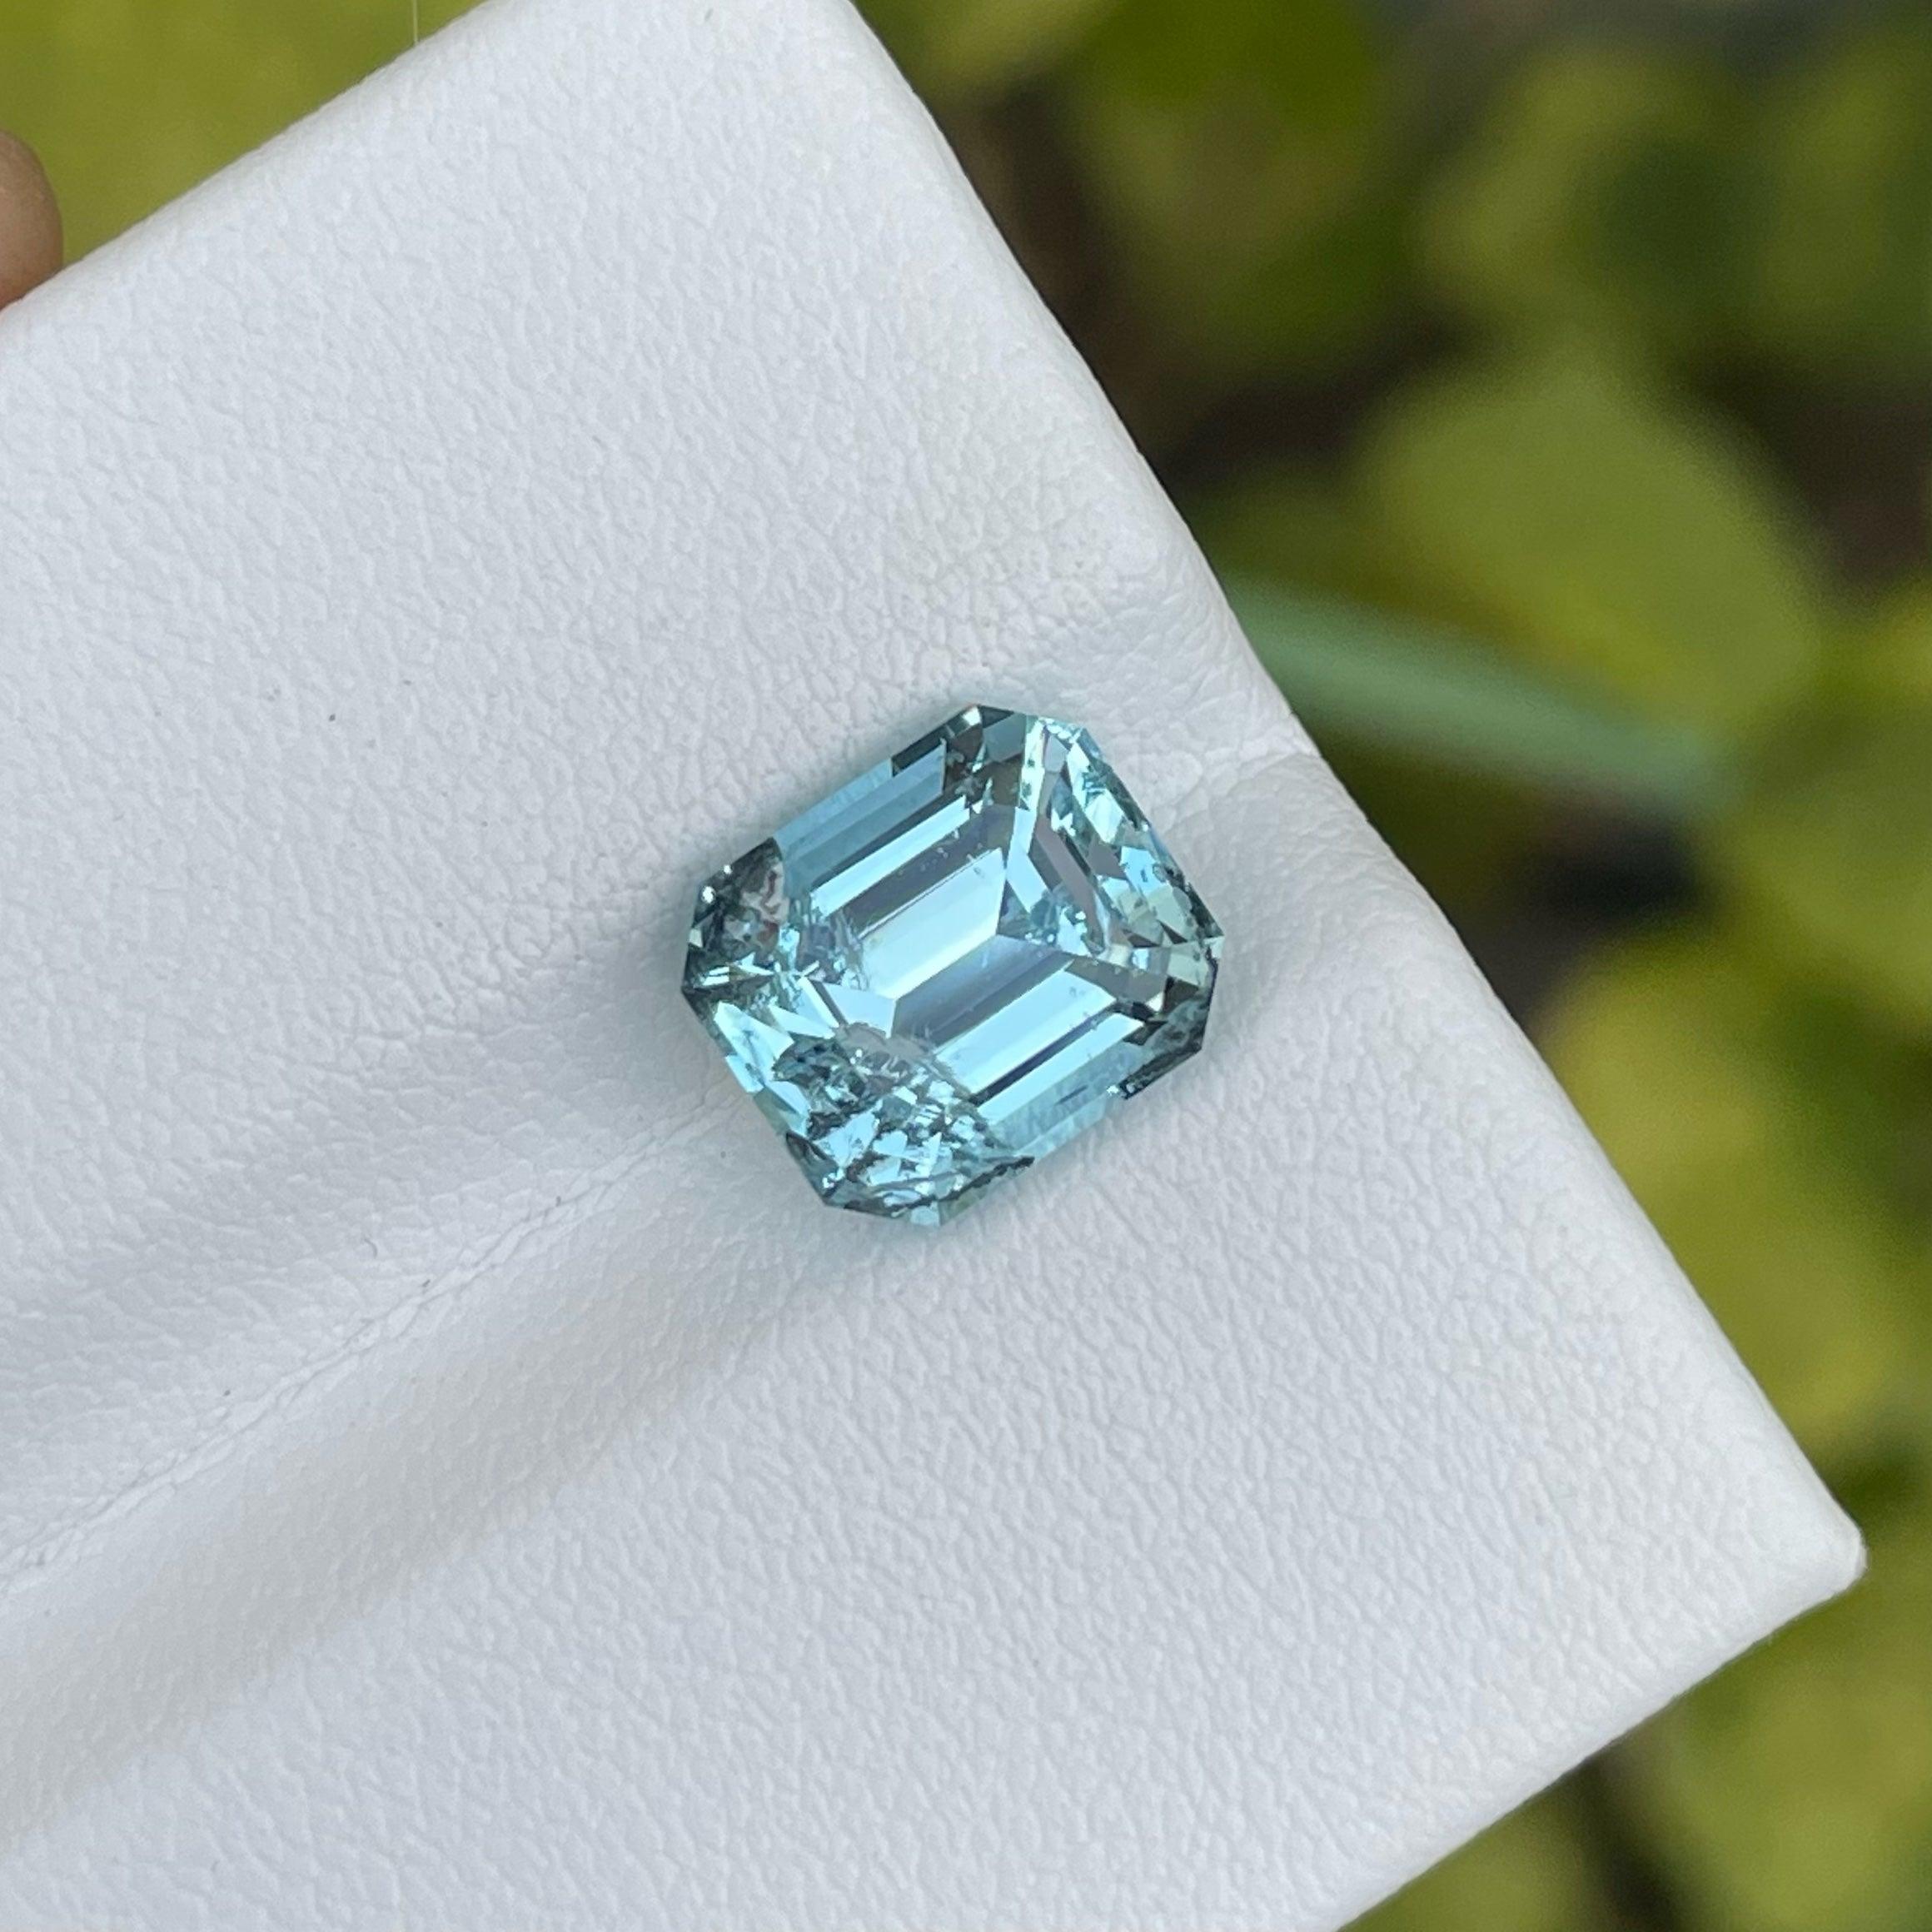 Lovely Blue Aquamarine Stone From Nigeria, Available for sale at wholesale price natural high quality 3.60 Carats Included Clarity Natural Loose Aquamarine from Nigeria.

Product Information:
GEMSTONE NAME:	Lovely Blue Aquamarine Stone From